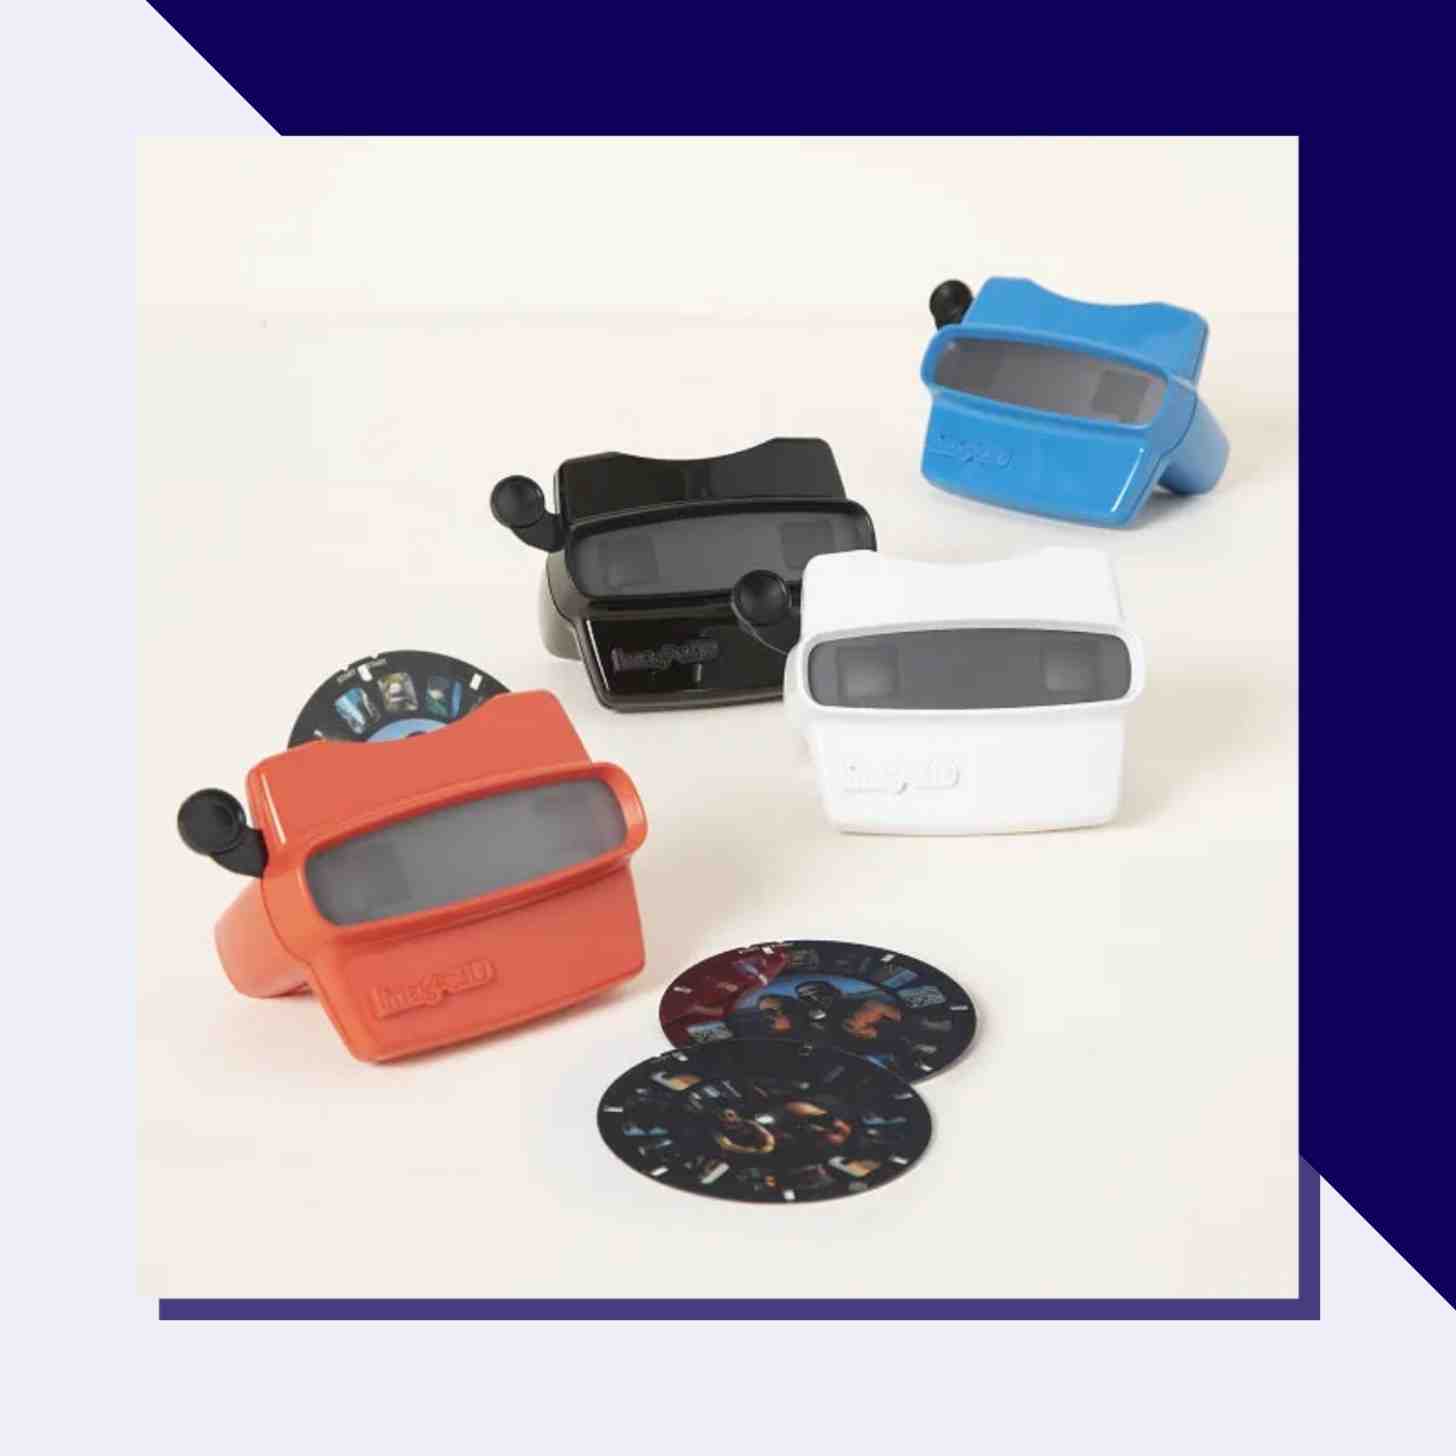 Four Fun Colored Viewfinders And Reels With Custom Photos On Them